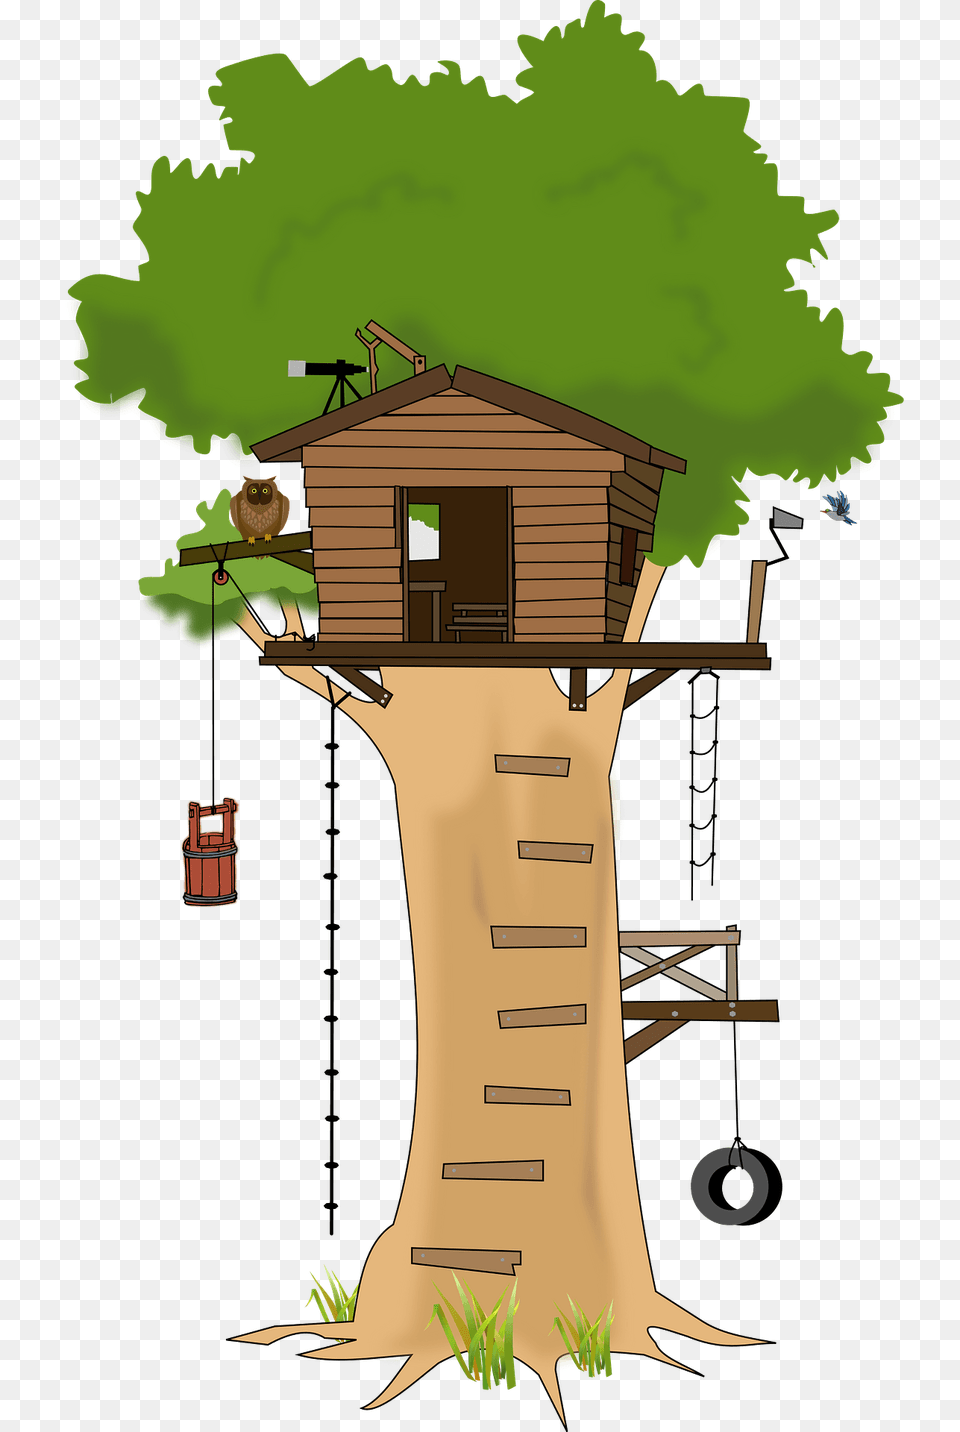 Tree Club House Clipart, Architecture, Rural, Outdoors, Nature Free Transparent Png